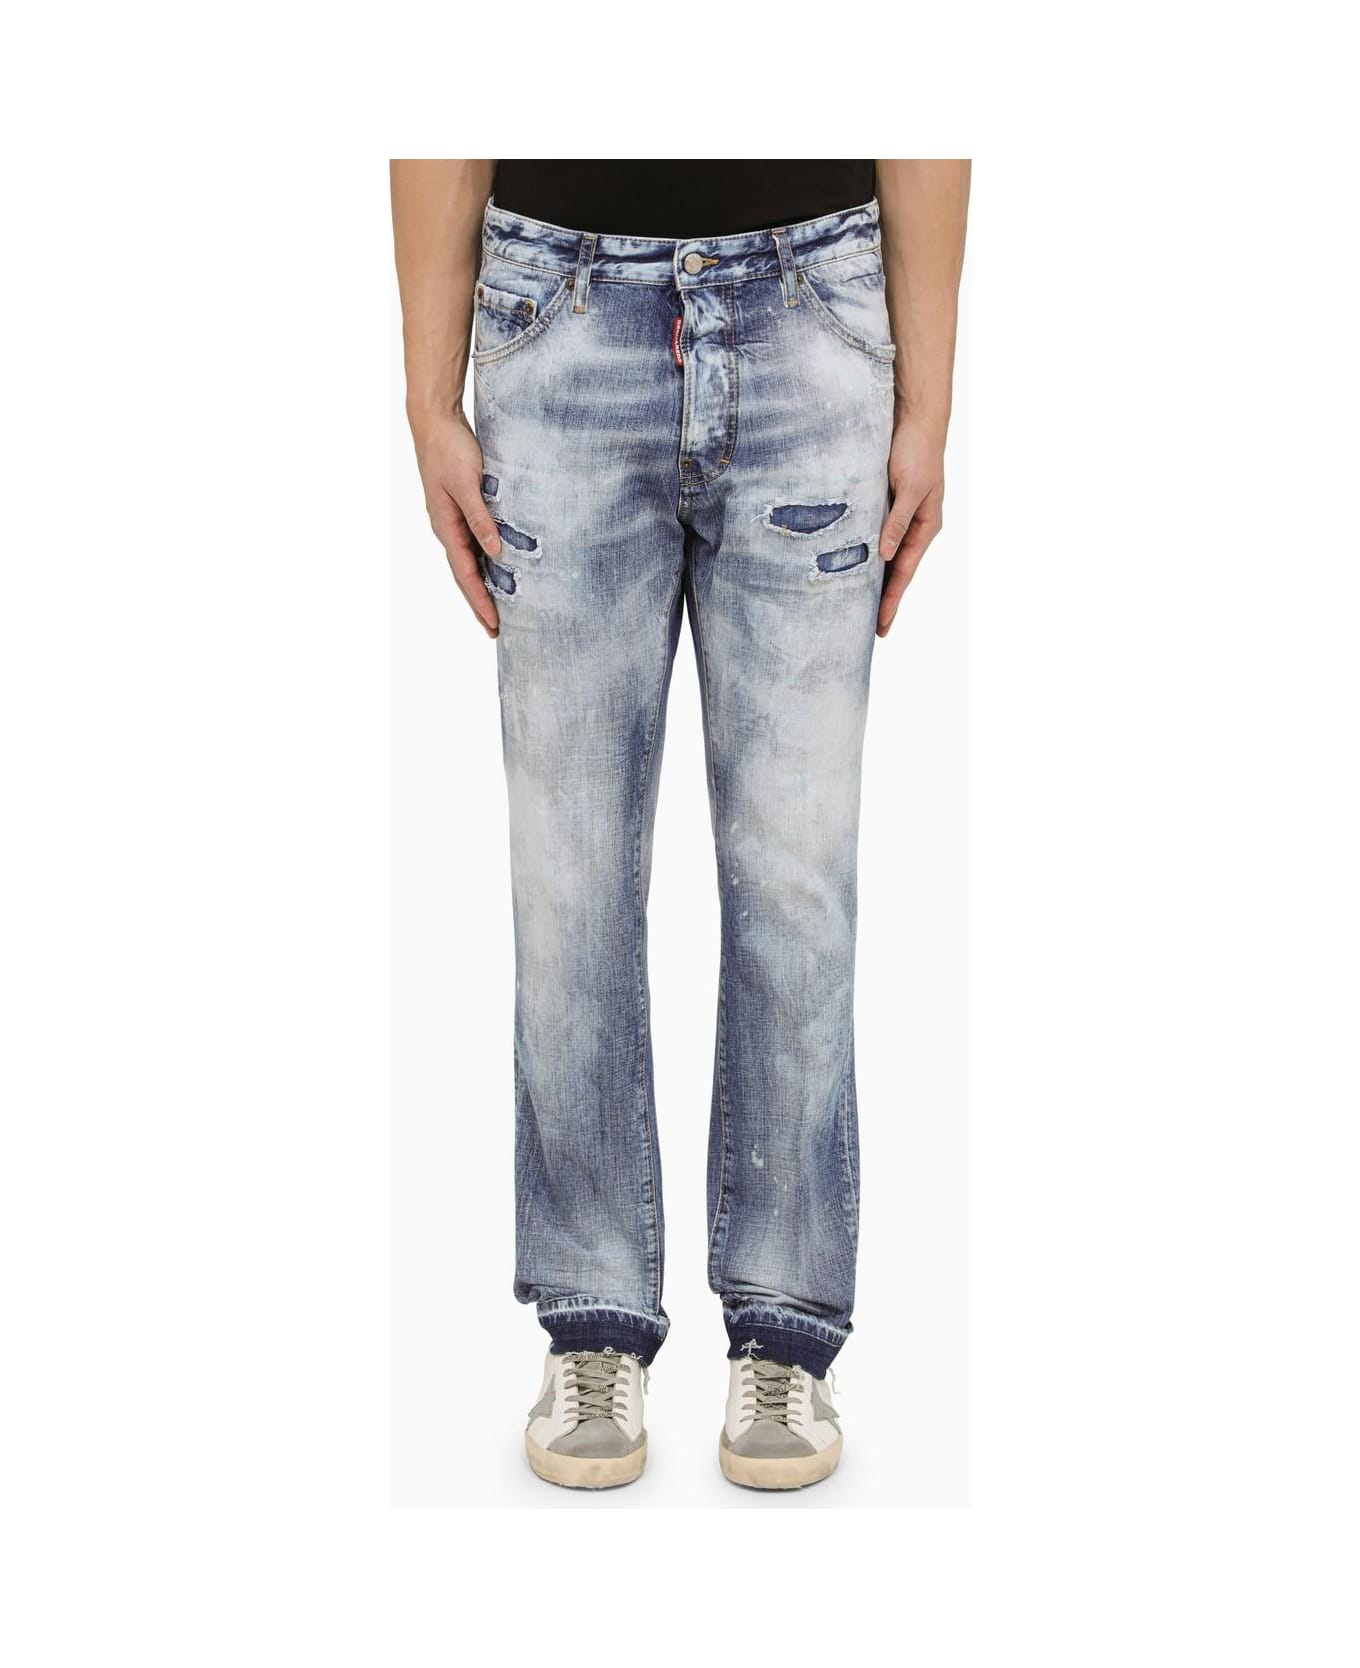 Dsquared2 Navy Blue Washed Jeans With Denim Wear - Blue デニム